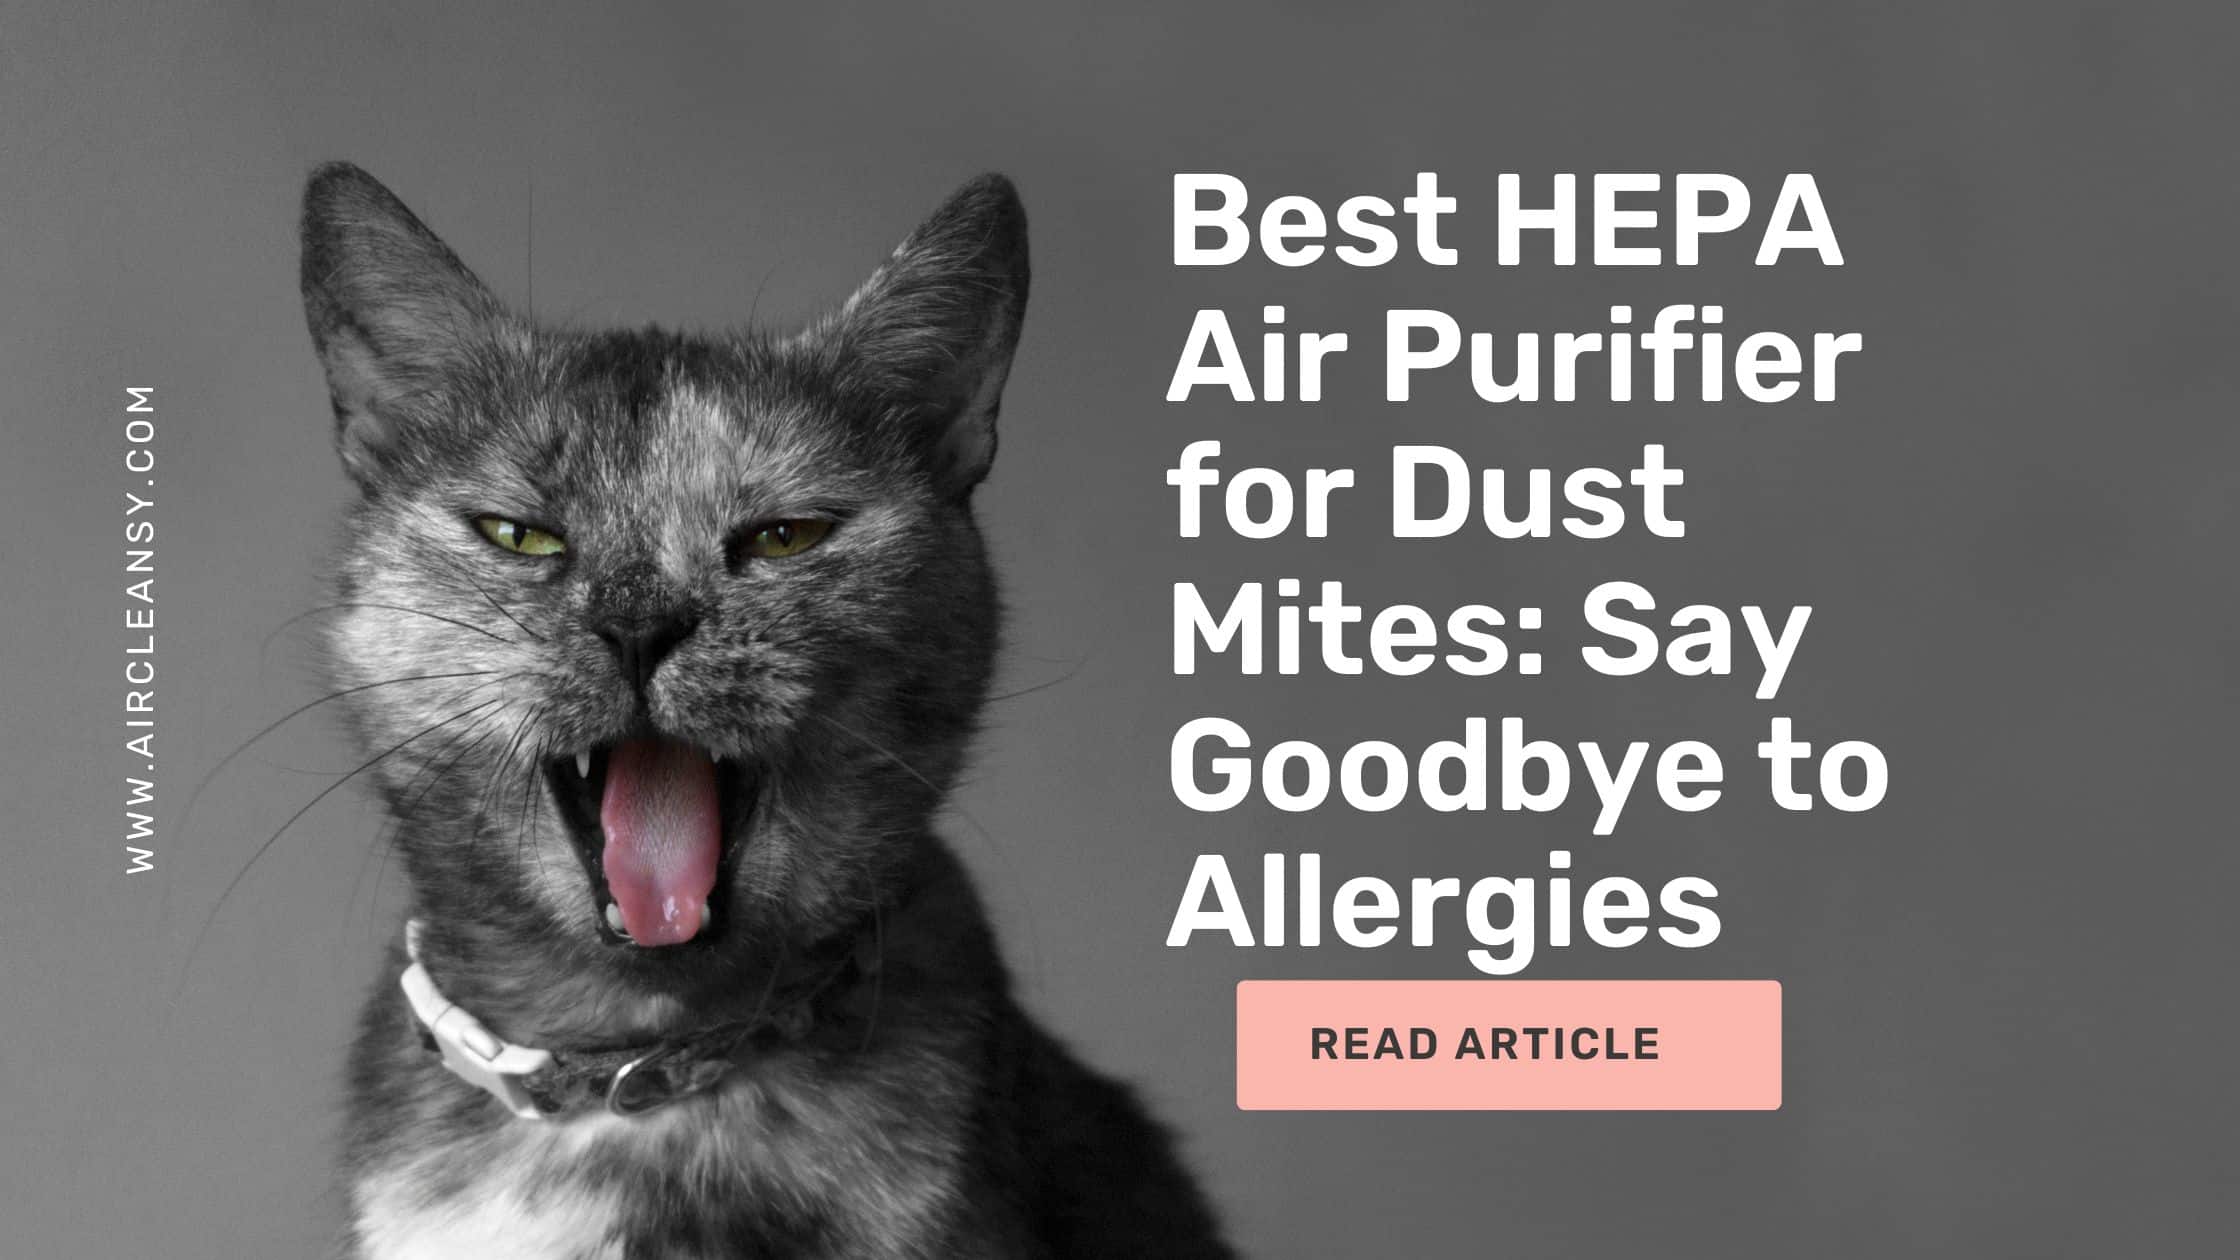 Best HEPA Air Purifier for Dust Mites